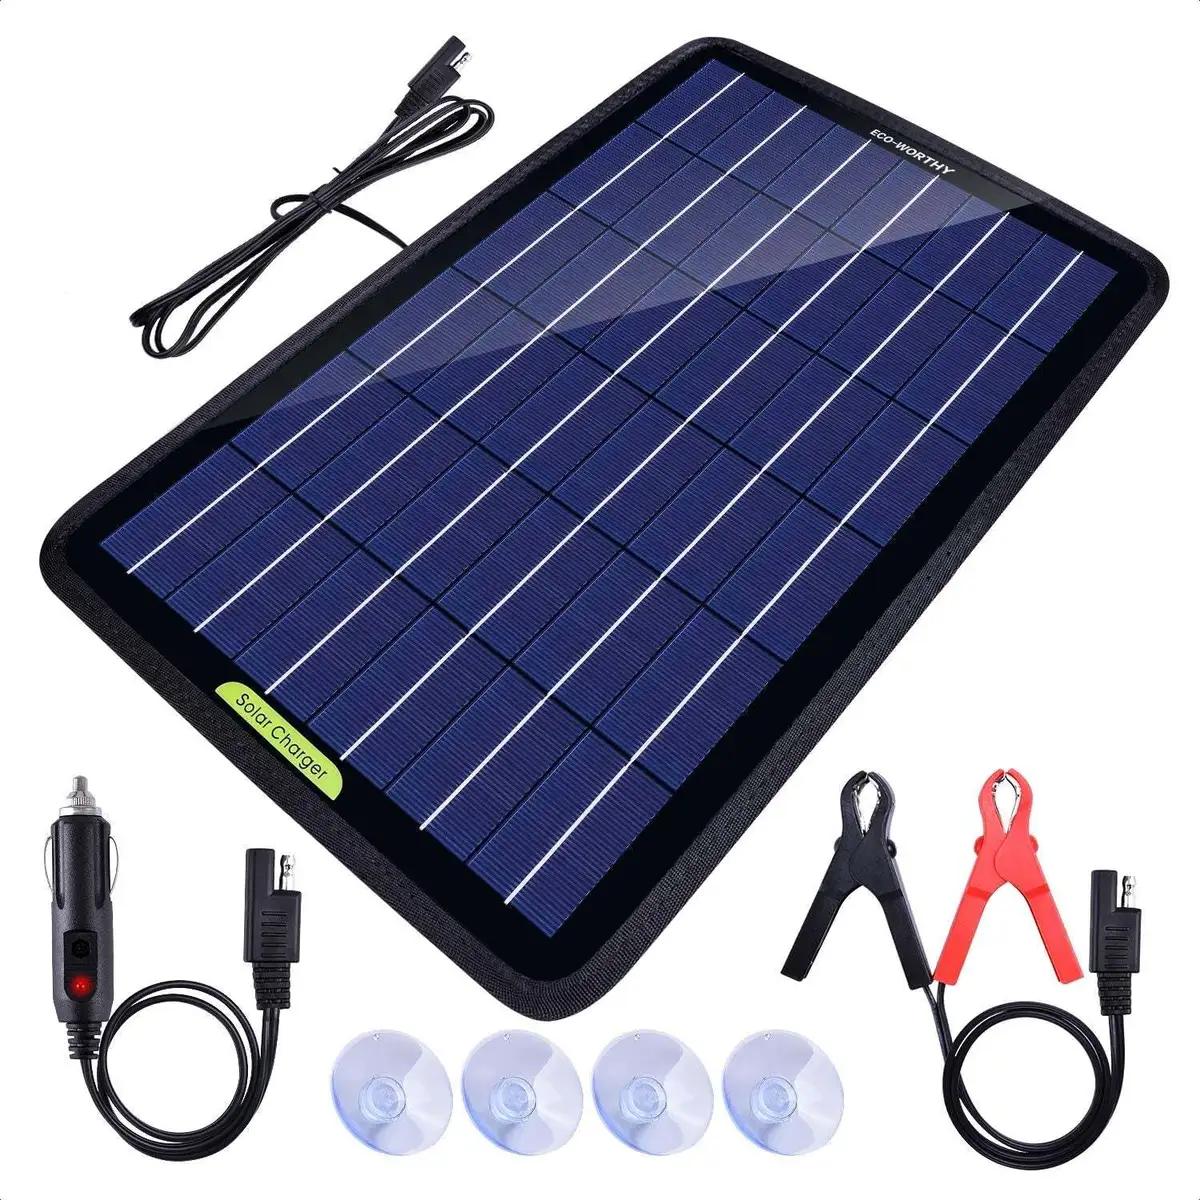 10 watt solar panel battery charger - Will a 10W solar panel charge a leisure battery